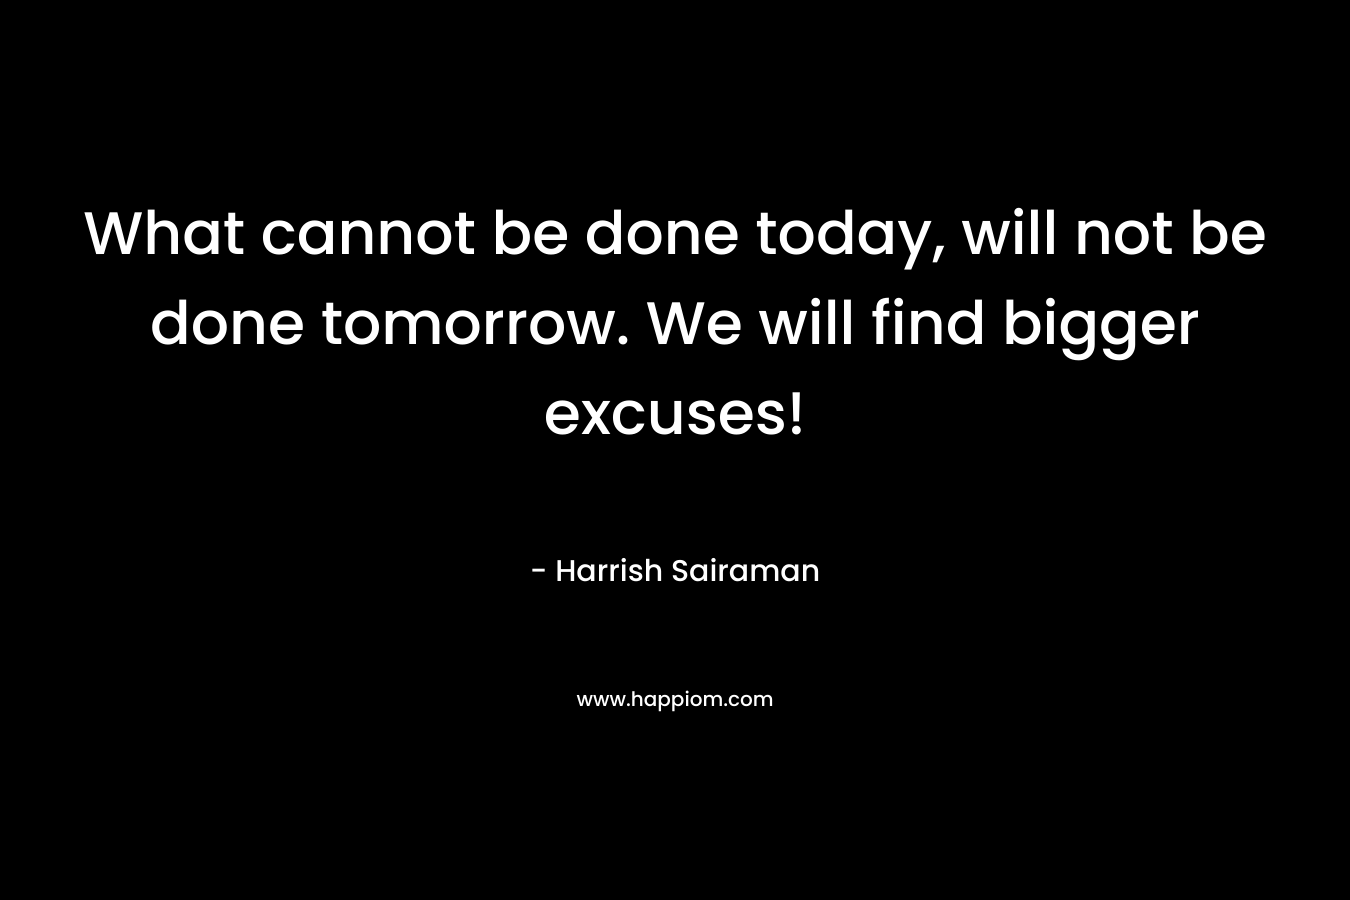 What cannot be done today, will not be done tomorrow. We will find bigger excuses! – Harrish Sairaman